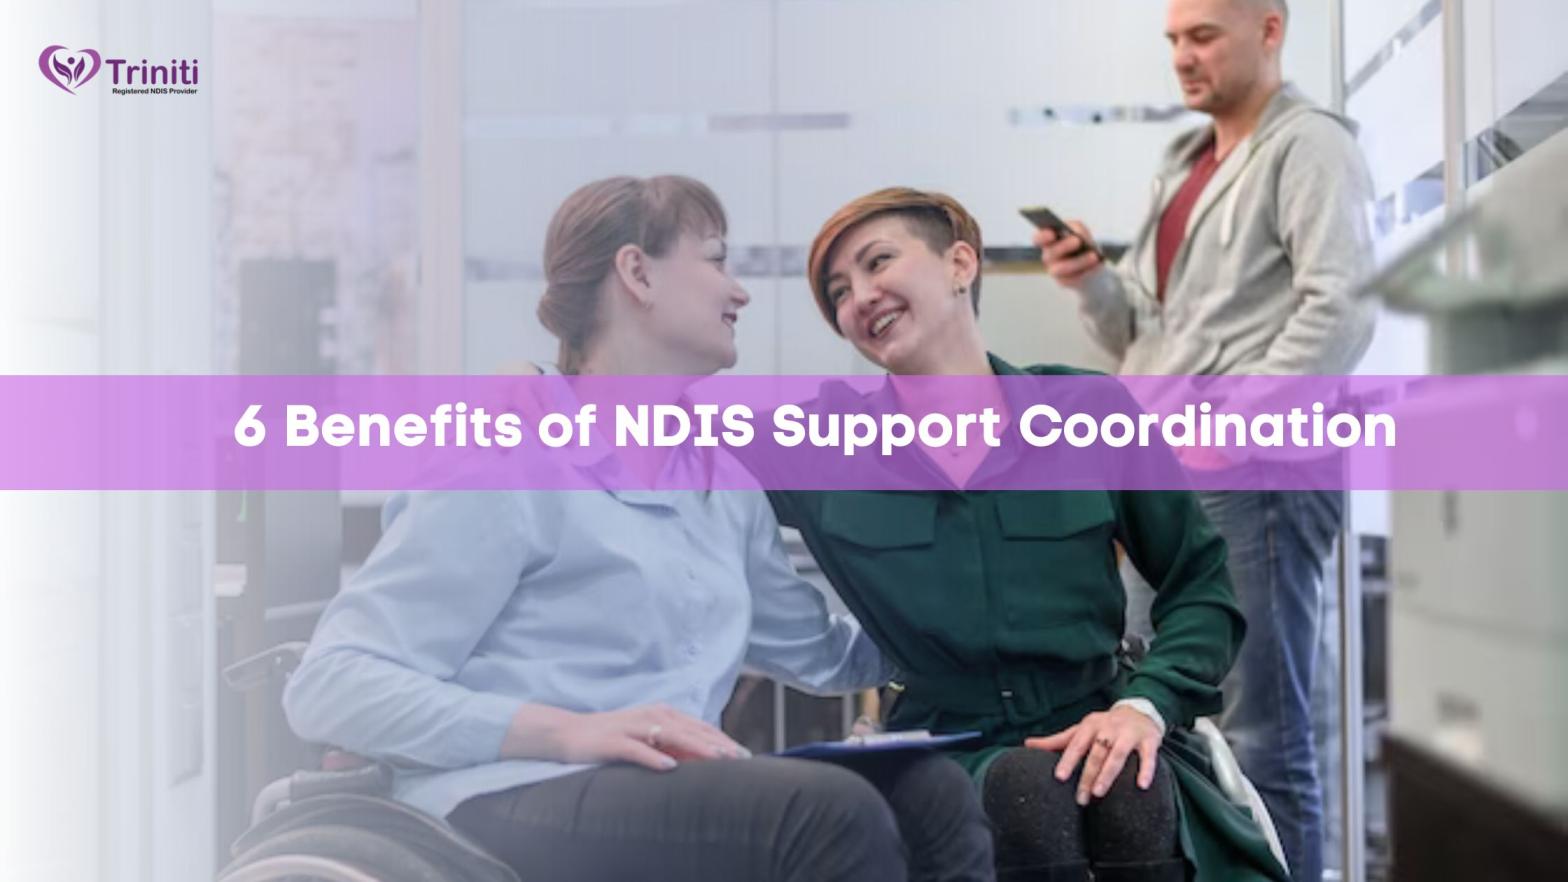 6 Benefits of NDIS Support Coordination